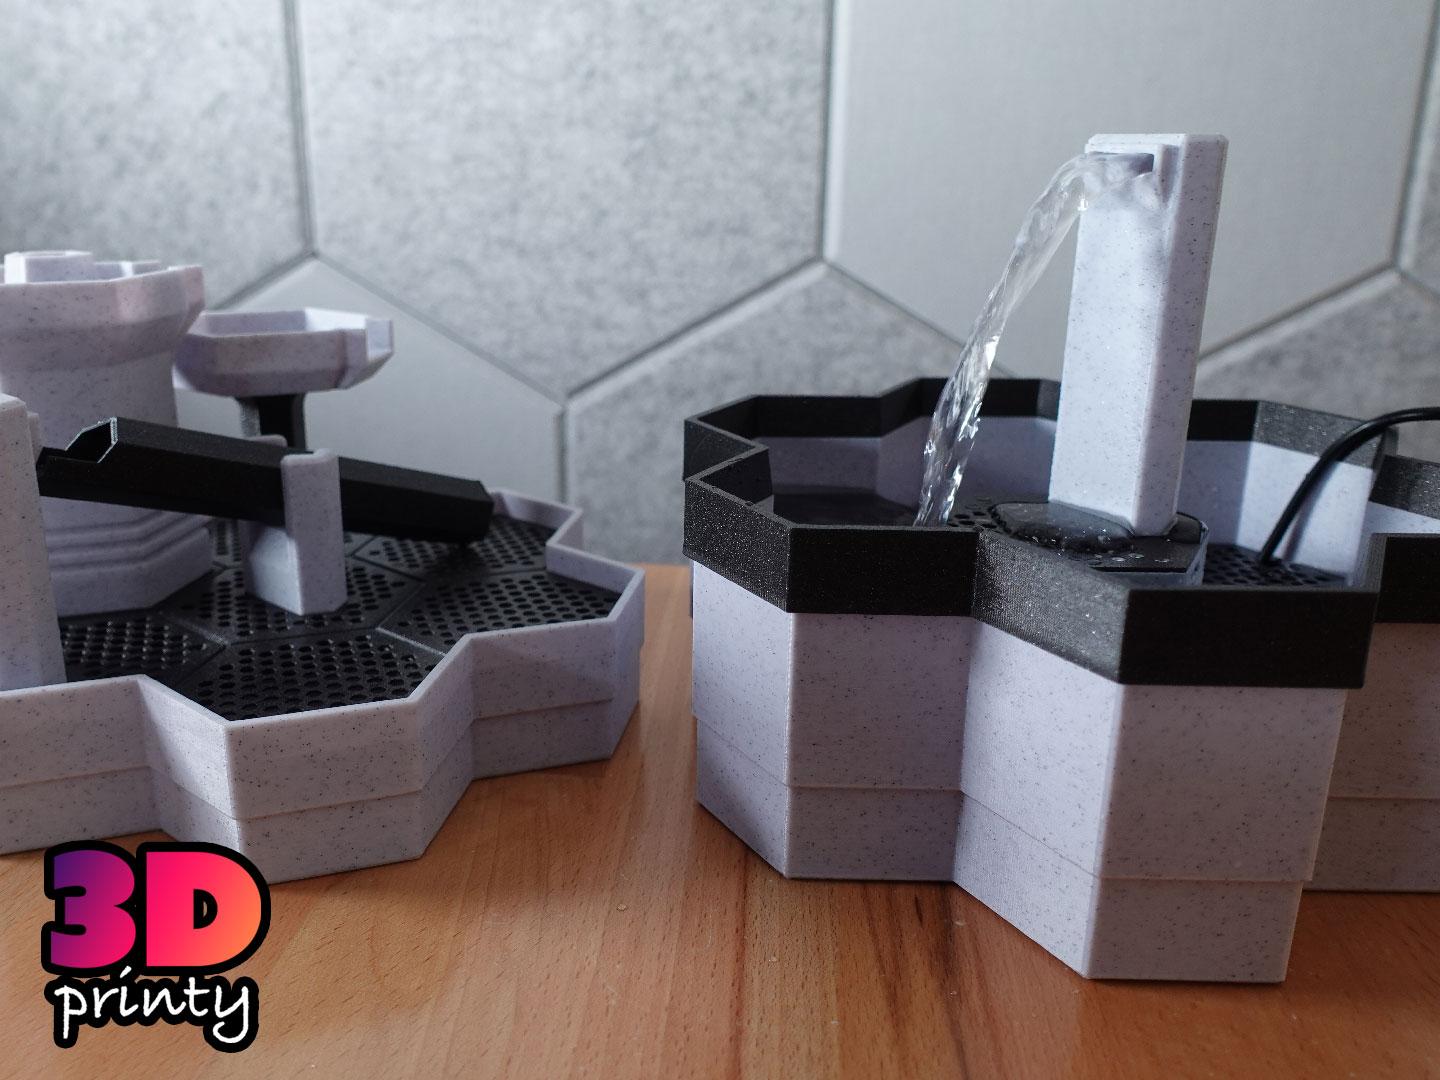 Modular Desktop Fountain - Tall Base and Spacers 3d model